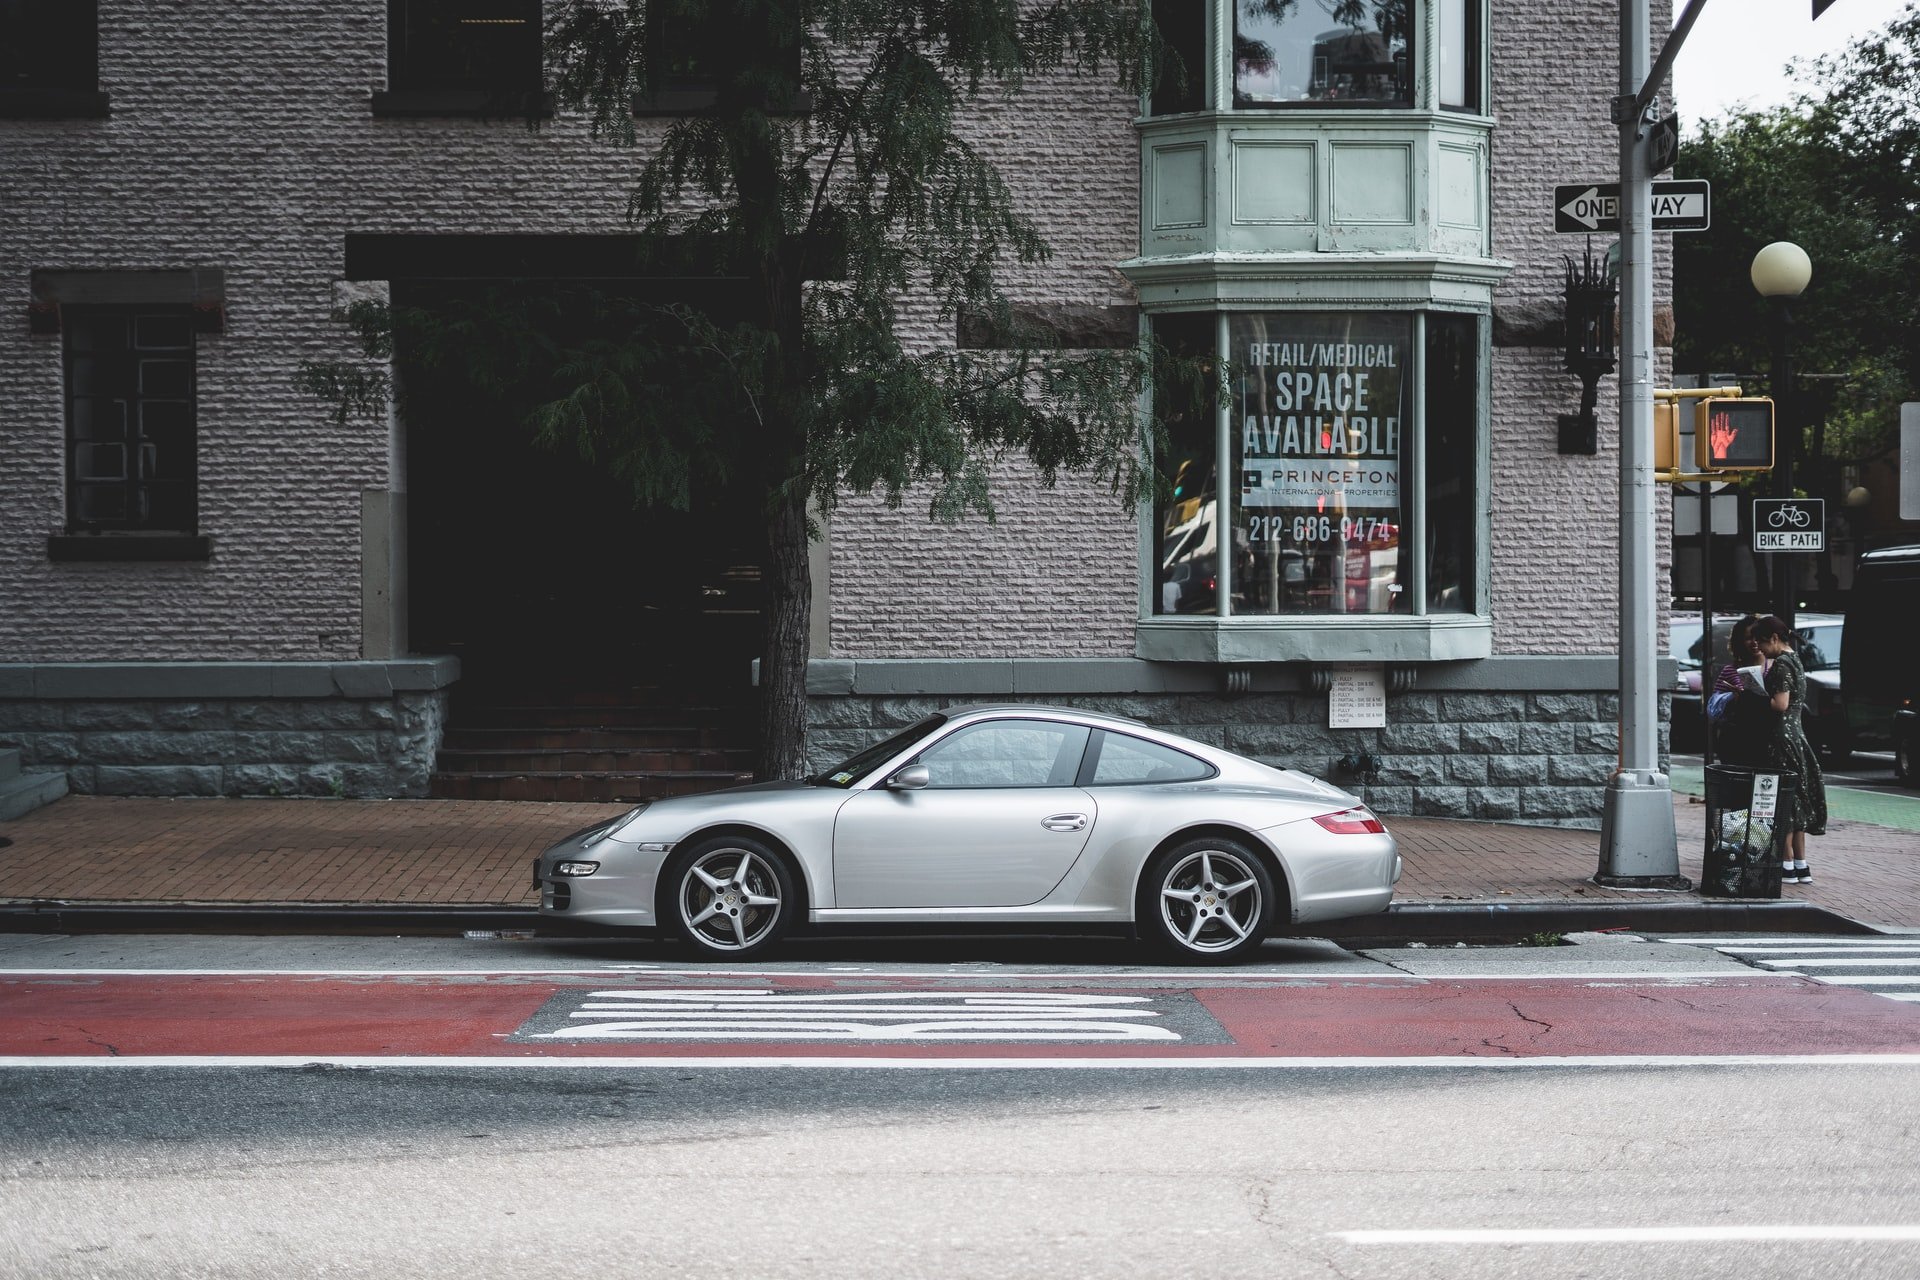 OP's grandmother saw the man get into a car batter than hers | Source: Unsplash